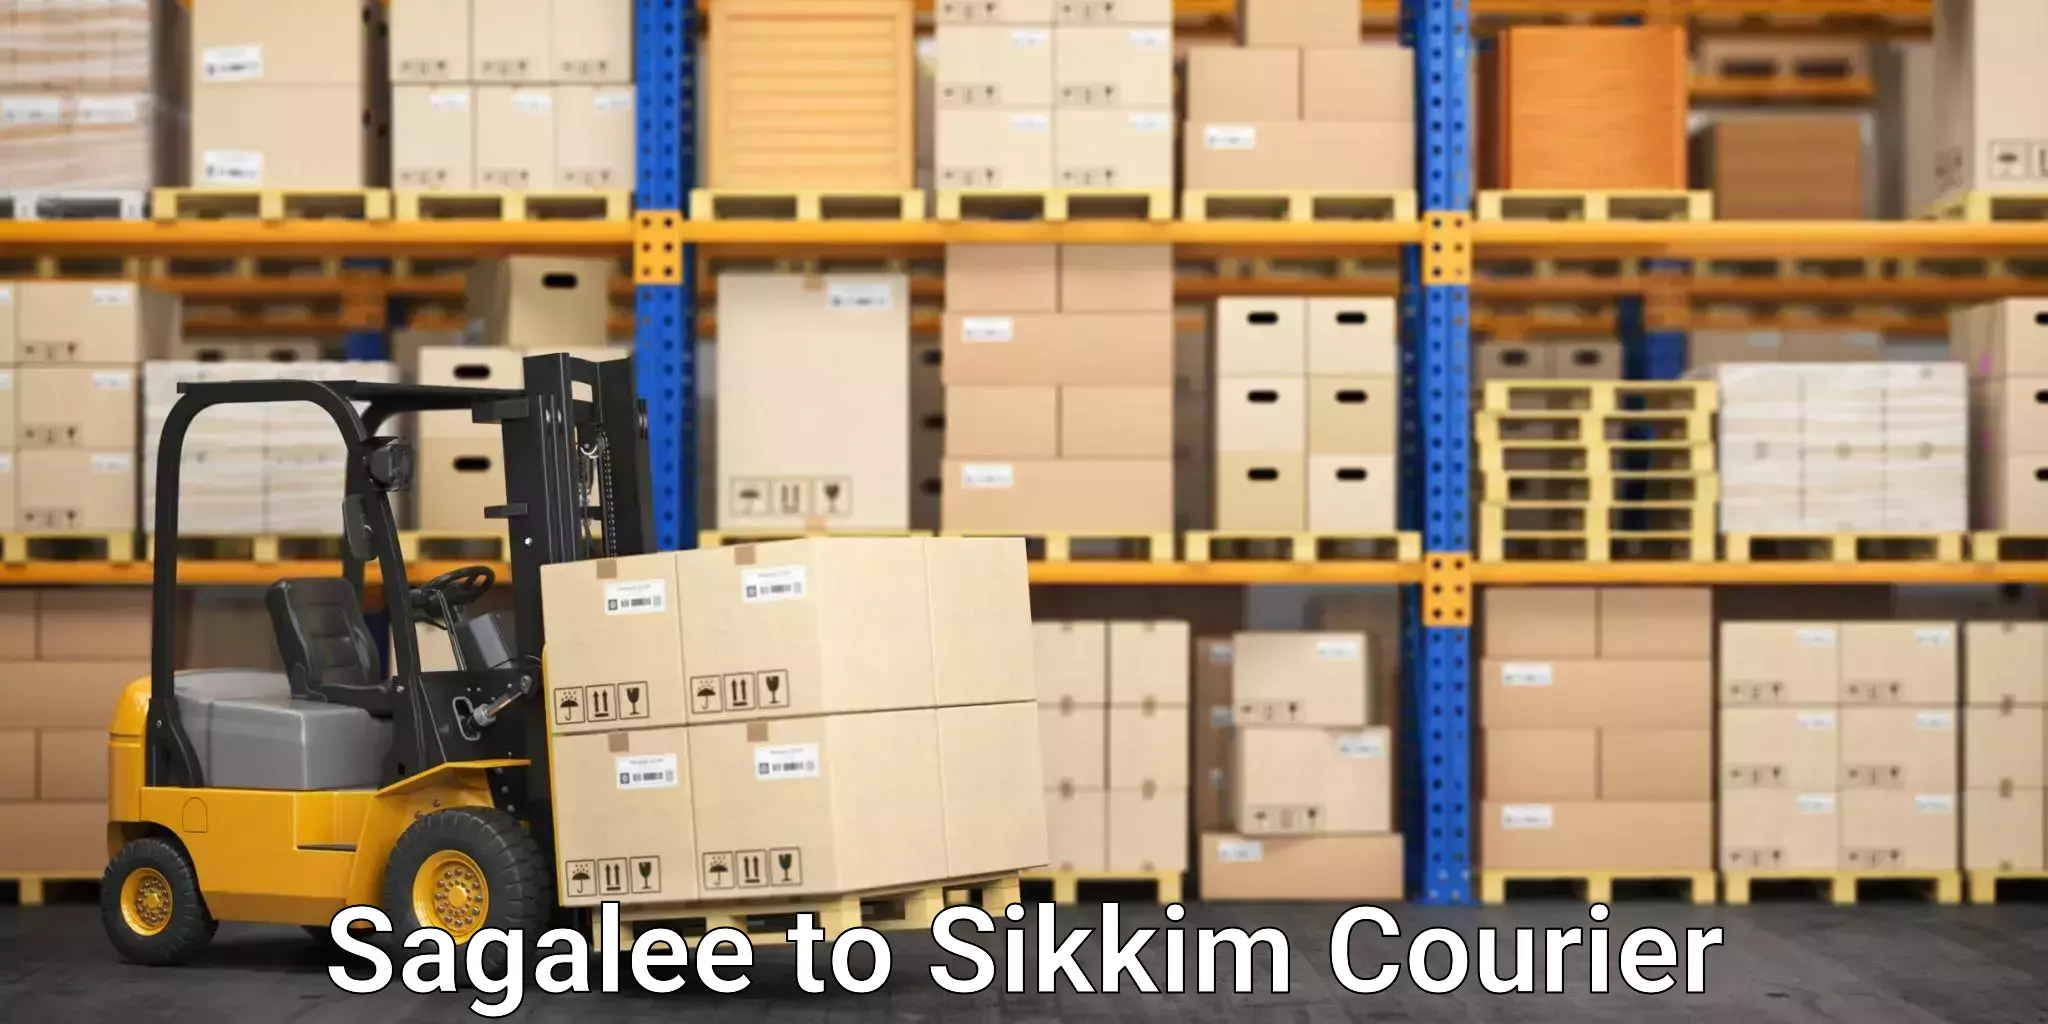 Parcel handling and care Sagalee to Sikkim